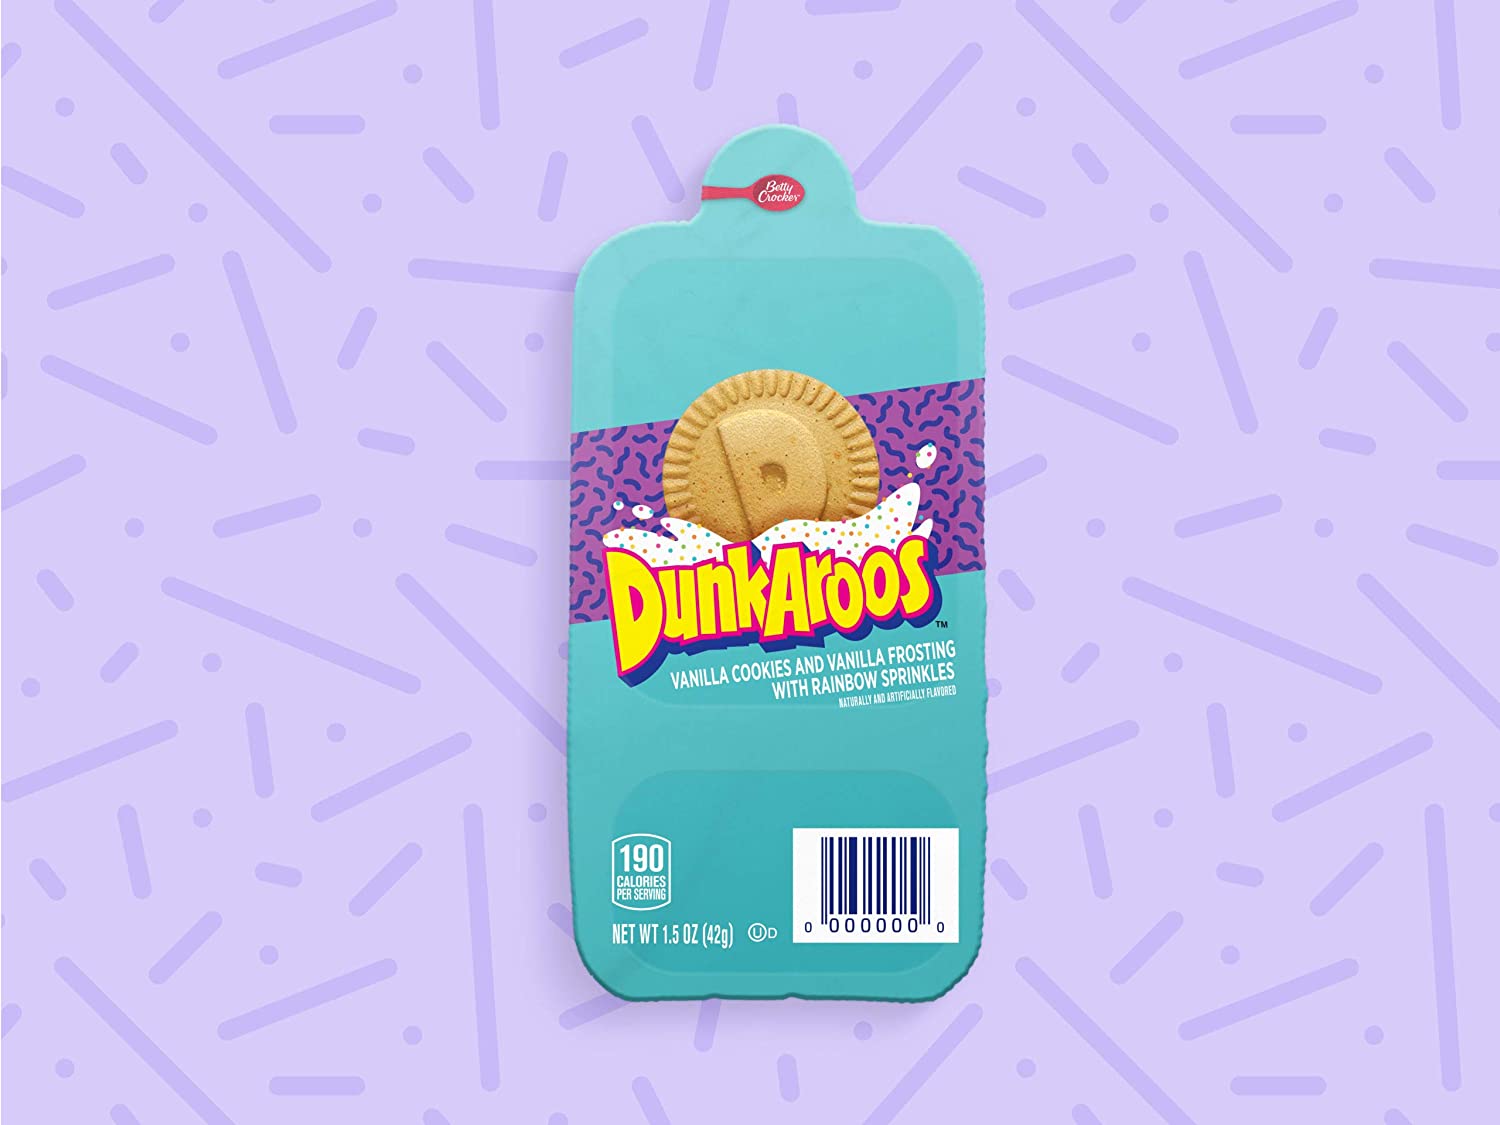 3 PACK - Dunk-A-Roos Vanilla Cookies and Vanilla Frosting W/ Rainbow Sprinkles Dunkaroos Classic Retro Vintage Snack Pack